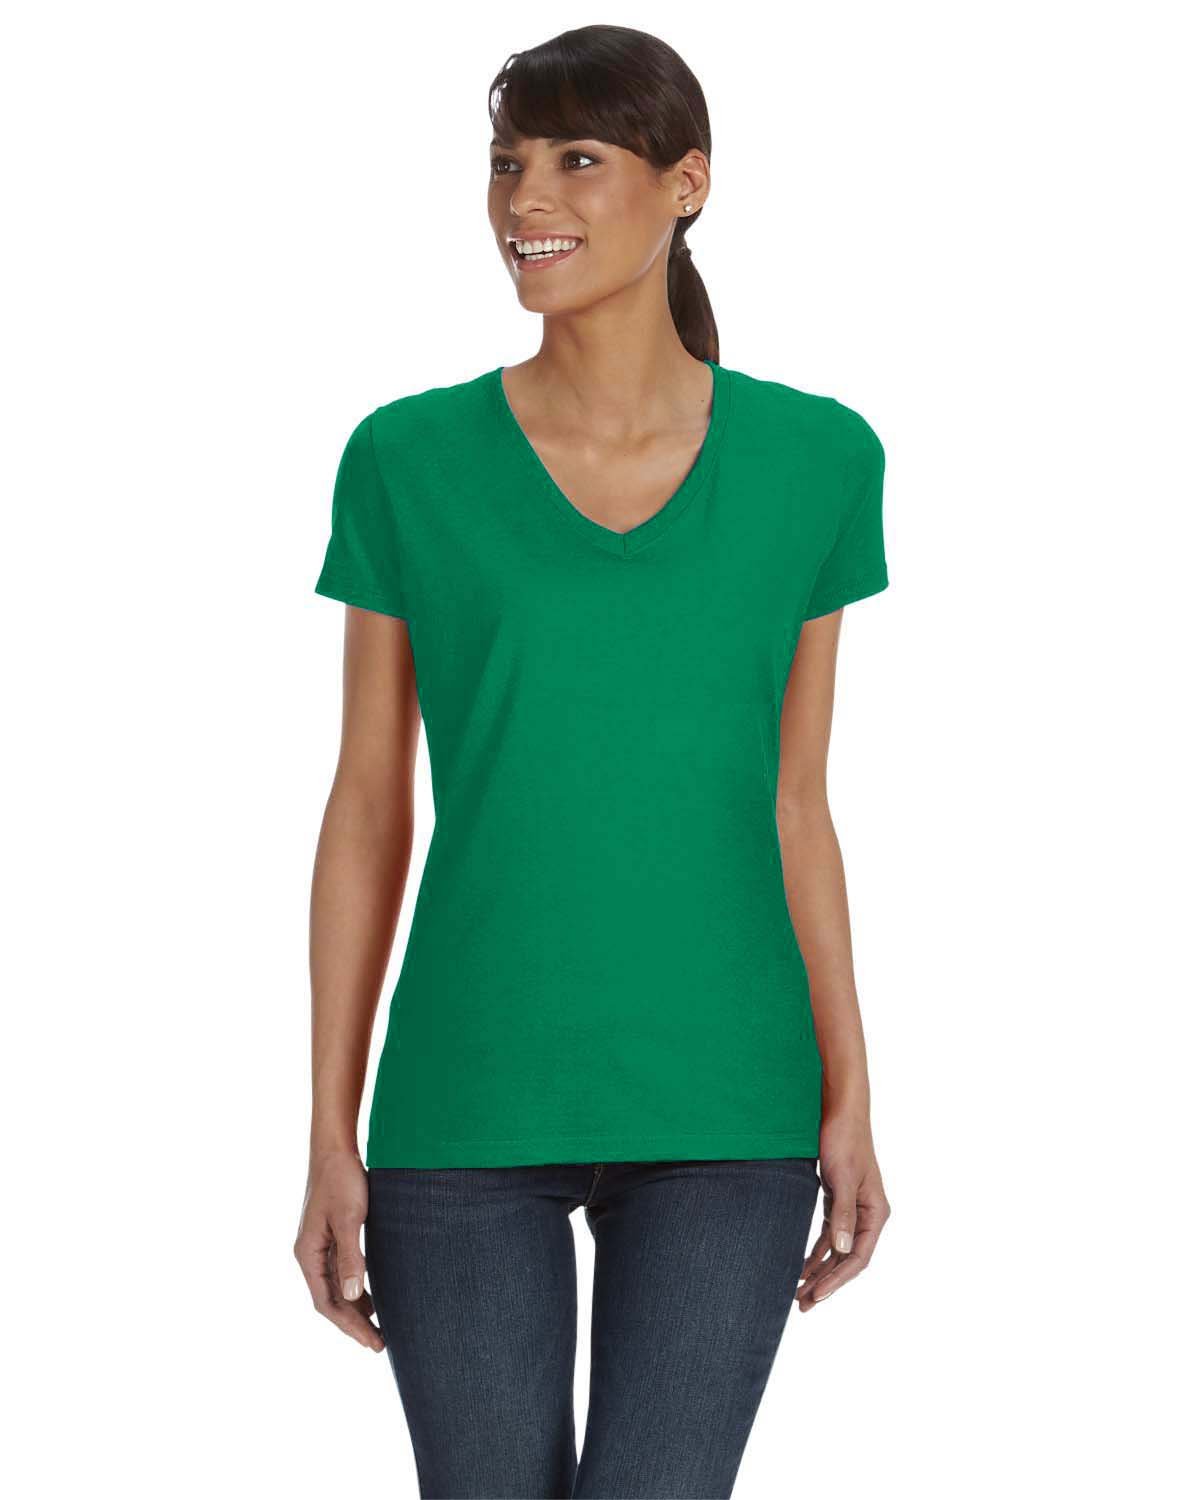 Fruit of the Loom Ladies' HD Cotton™ V-Neck T-Shirt KELLY 